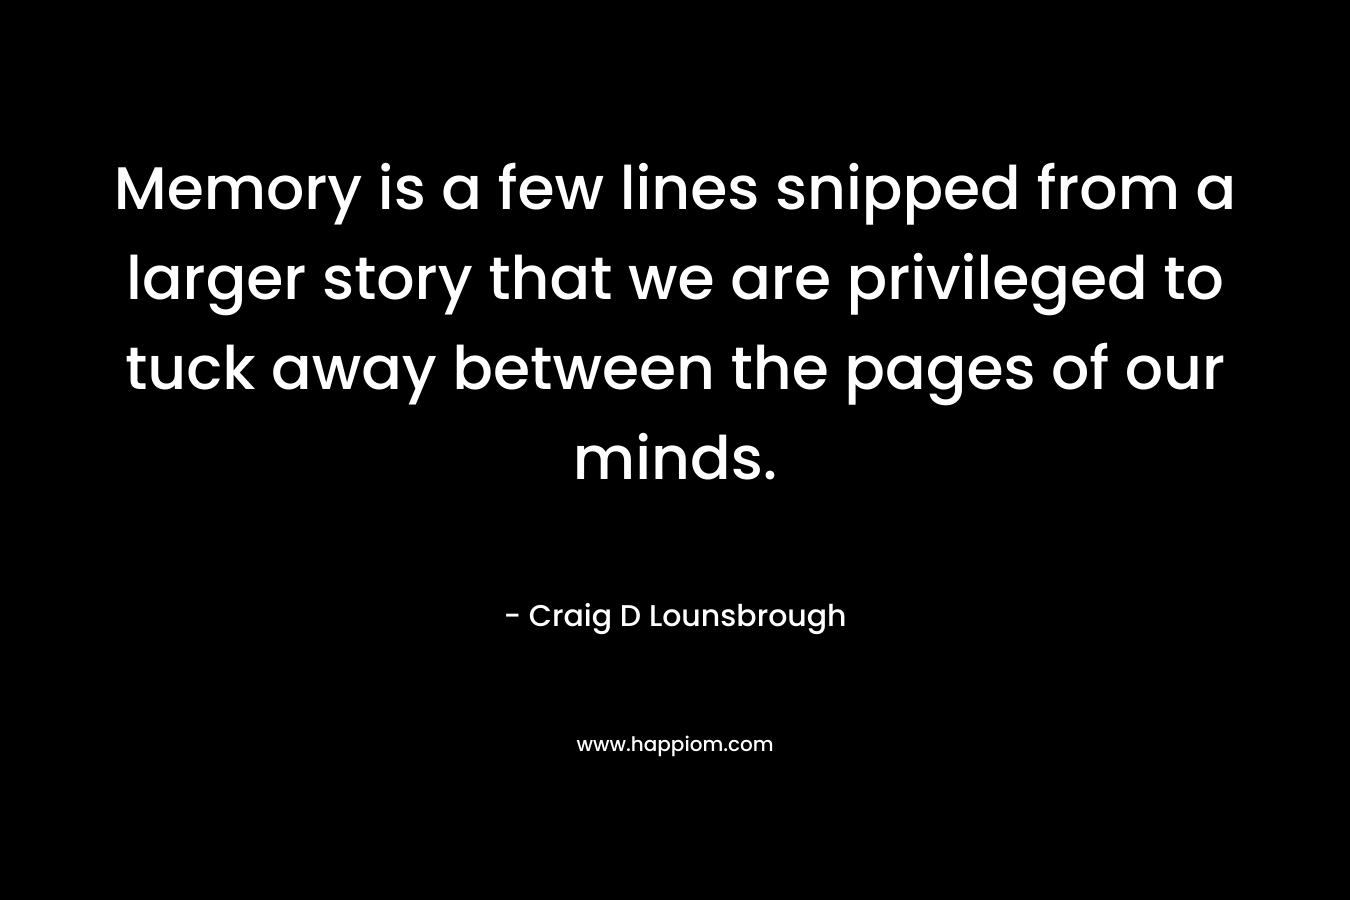 Memory is a few lines snipped from a larger story that we are privileged to tuck away between the pages of our minds. – Craig D Lounsbrough